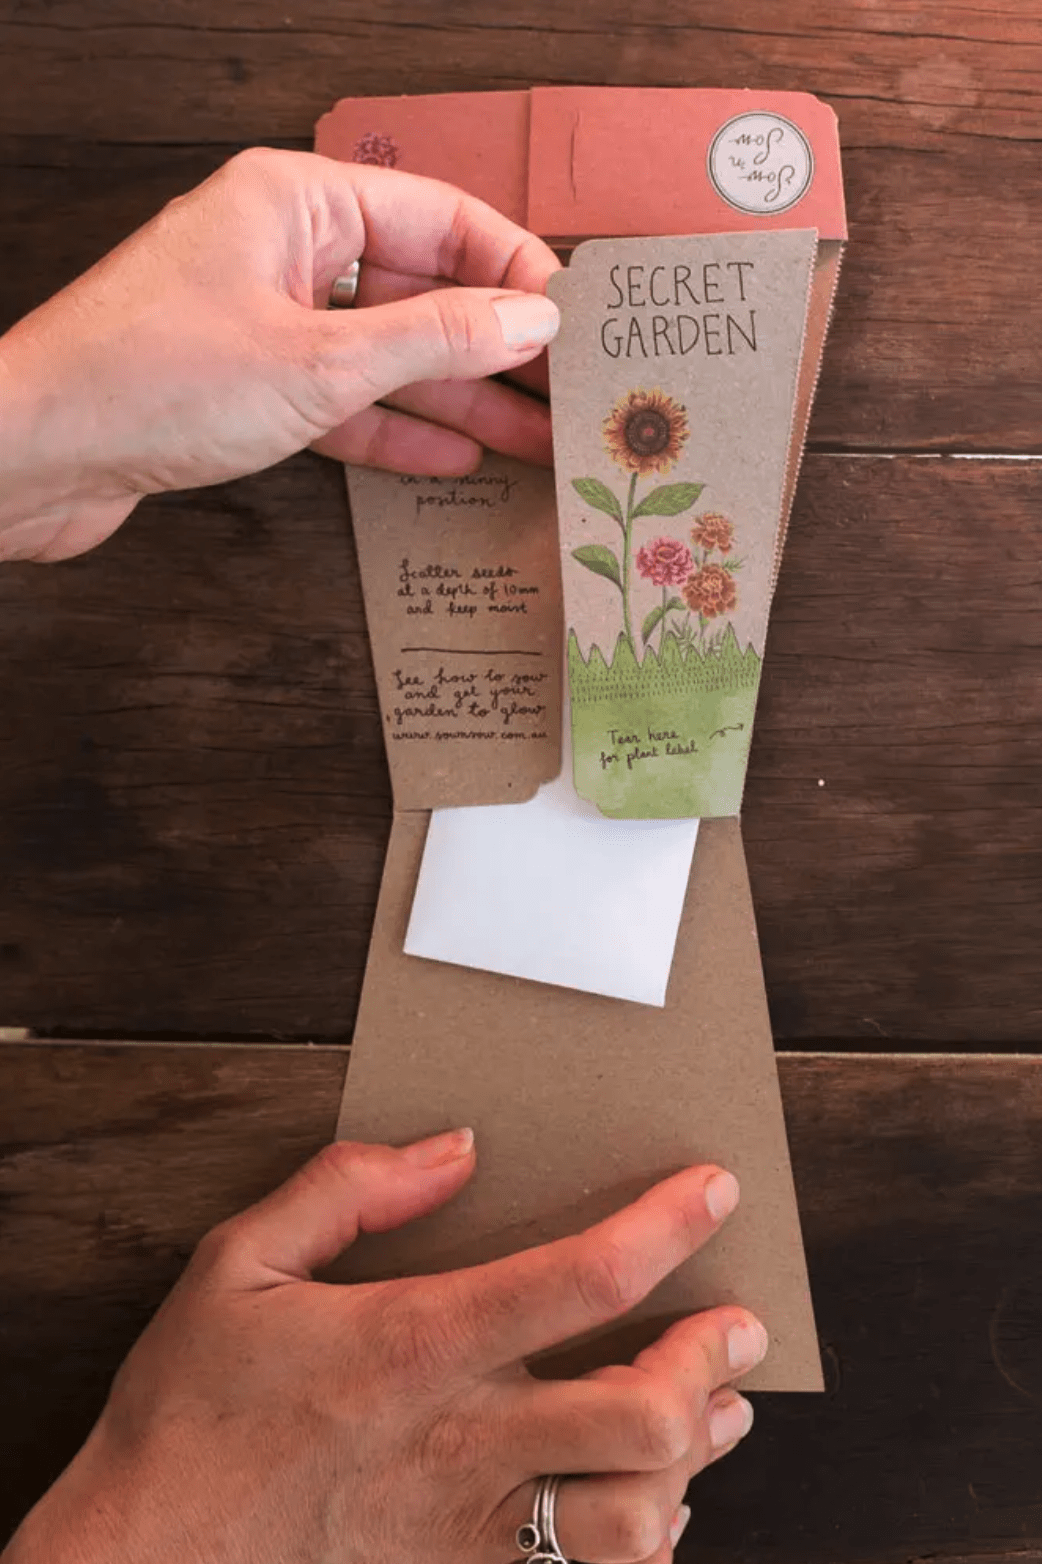 A person opening an envelope with Seeds - Secret Garden from Sow n Sow.